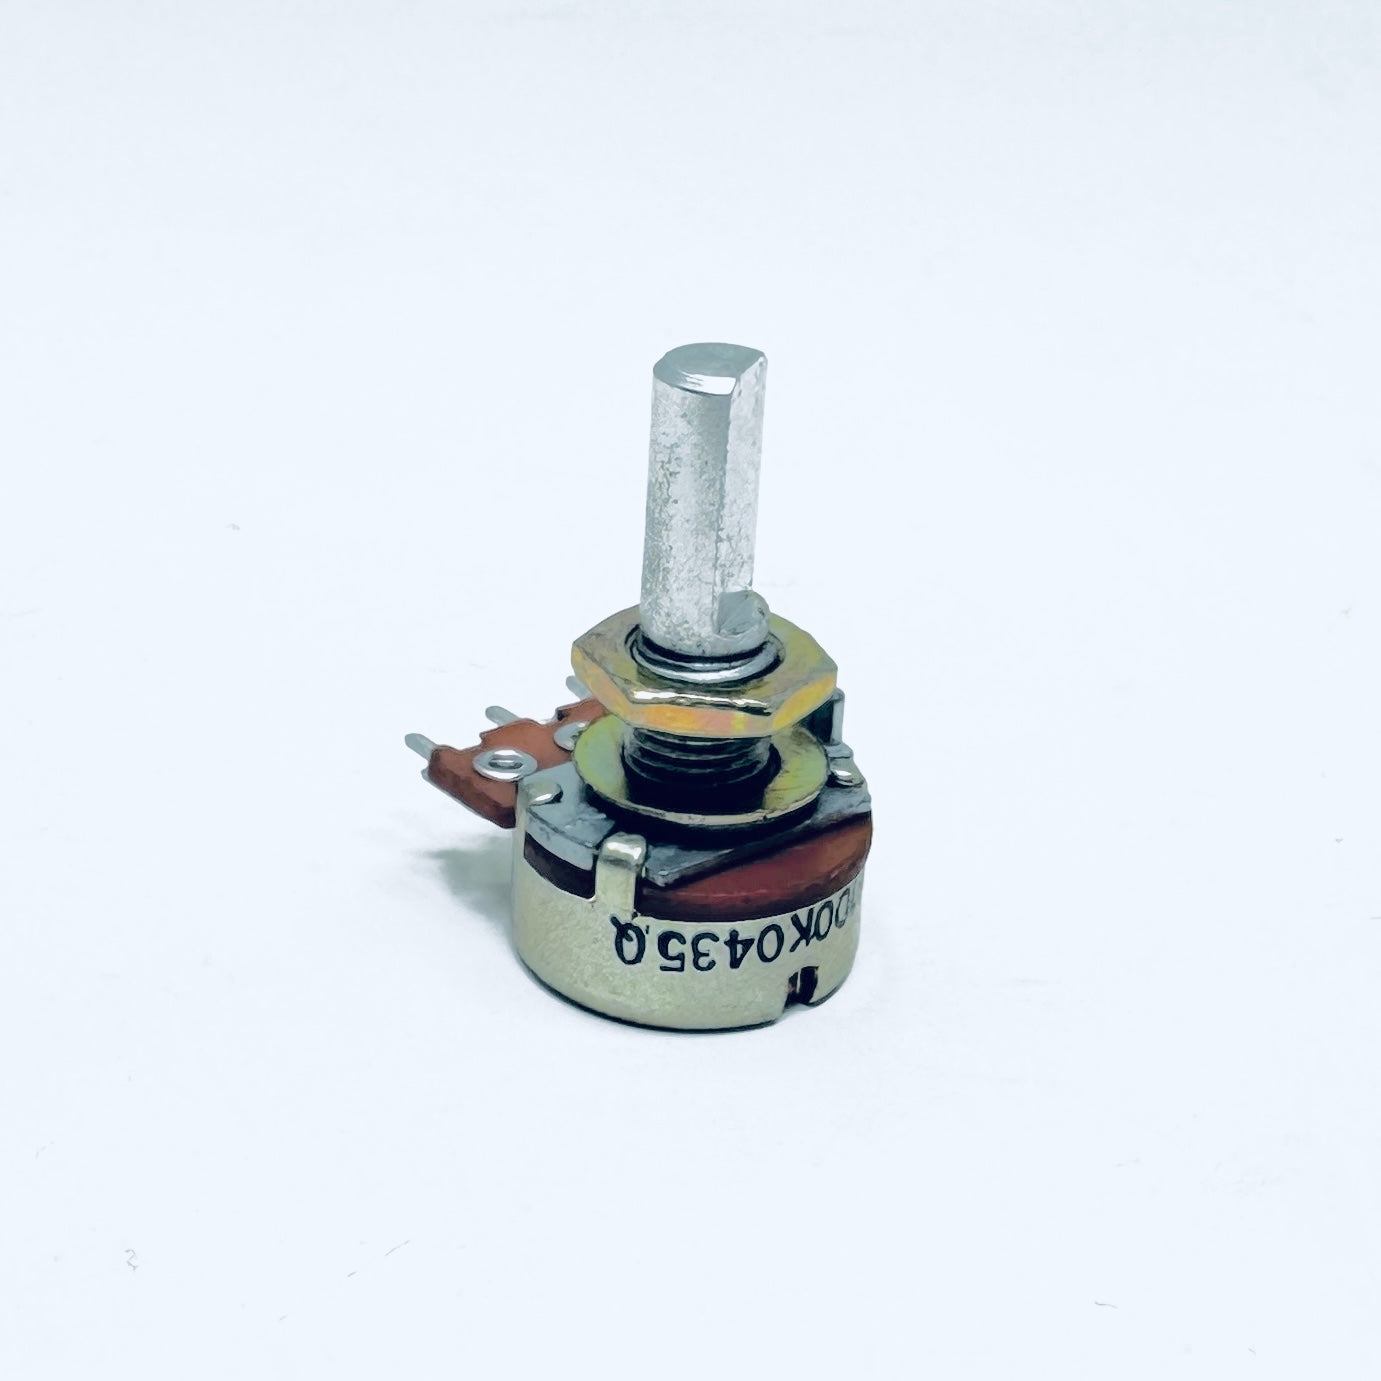 Control 100k 20% Lin Potentiometer, ruby potentiometers, fender authentic replacement parts